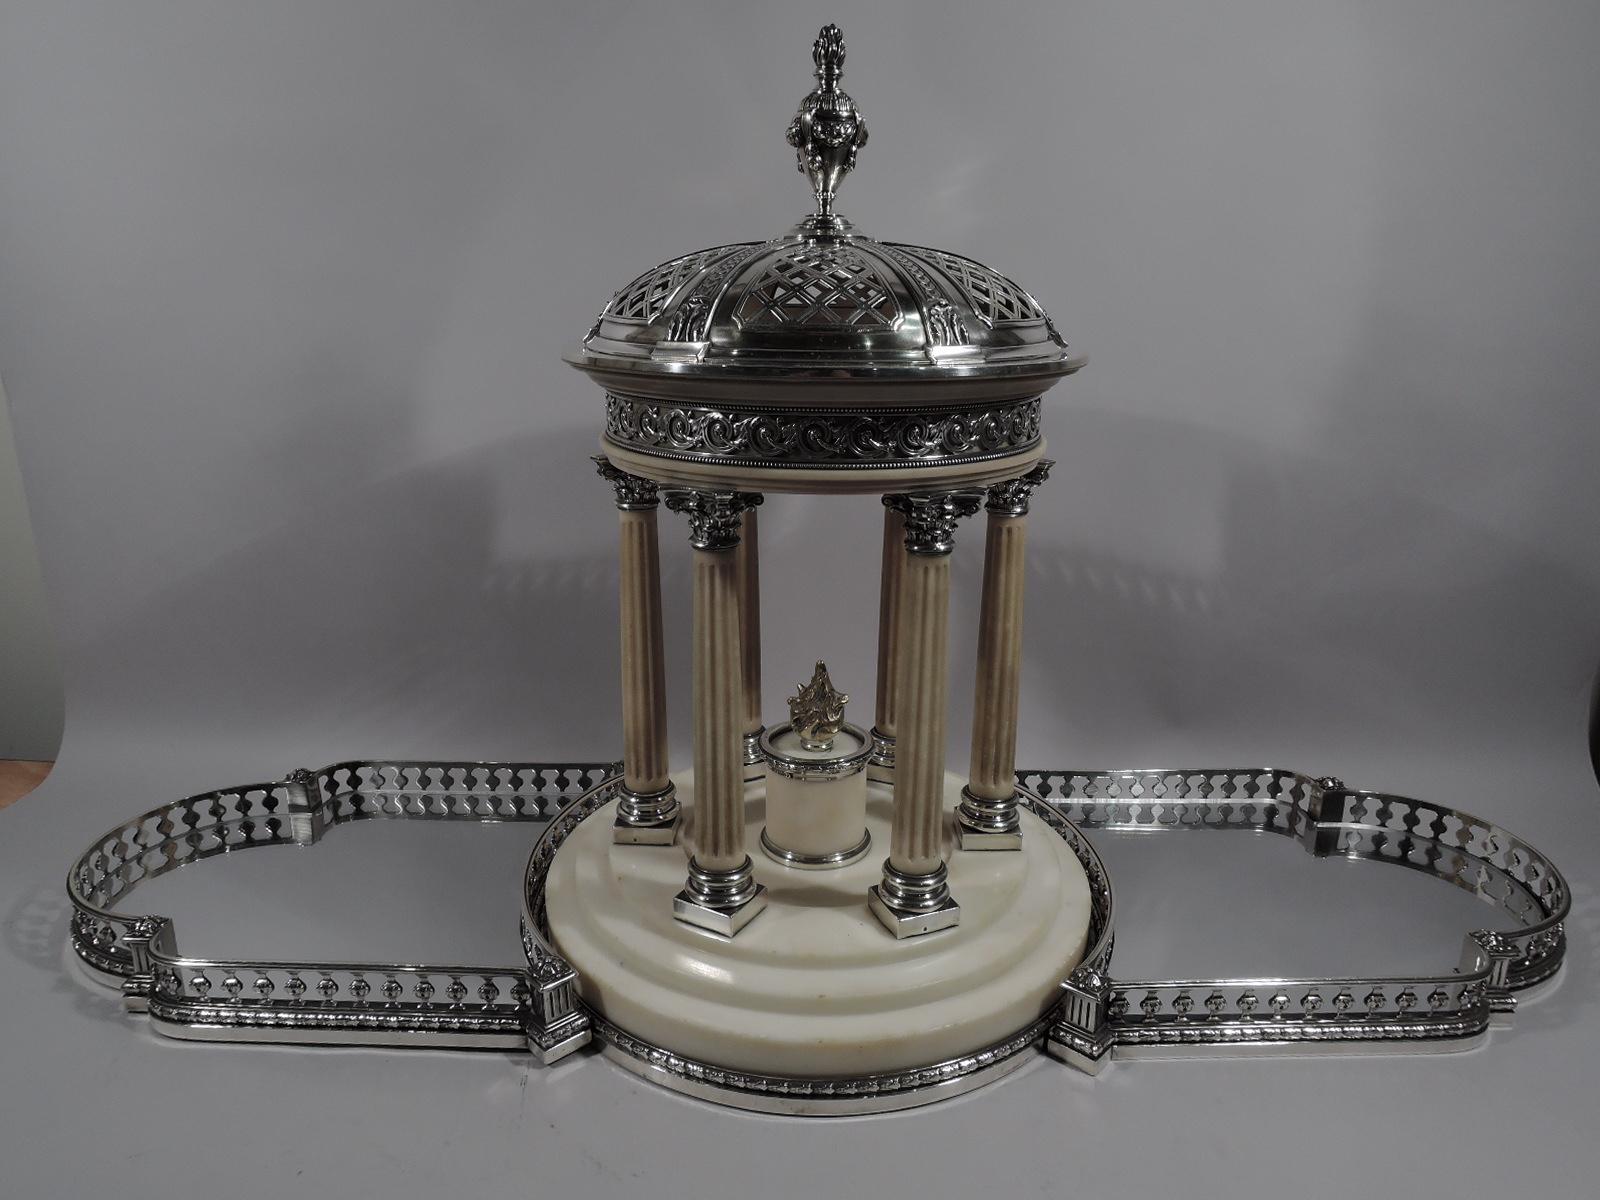 French 950 silver and marble centerpiece based on Marie Antoinette’s garden folly, the Temple d’Amour at Versailles. 

Round stepped marble base with silver imbricated leaf-and-berry border. Six fluted columns with silver base and Corinthian